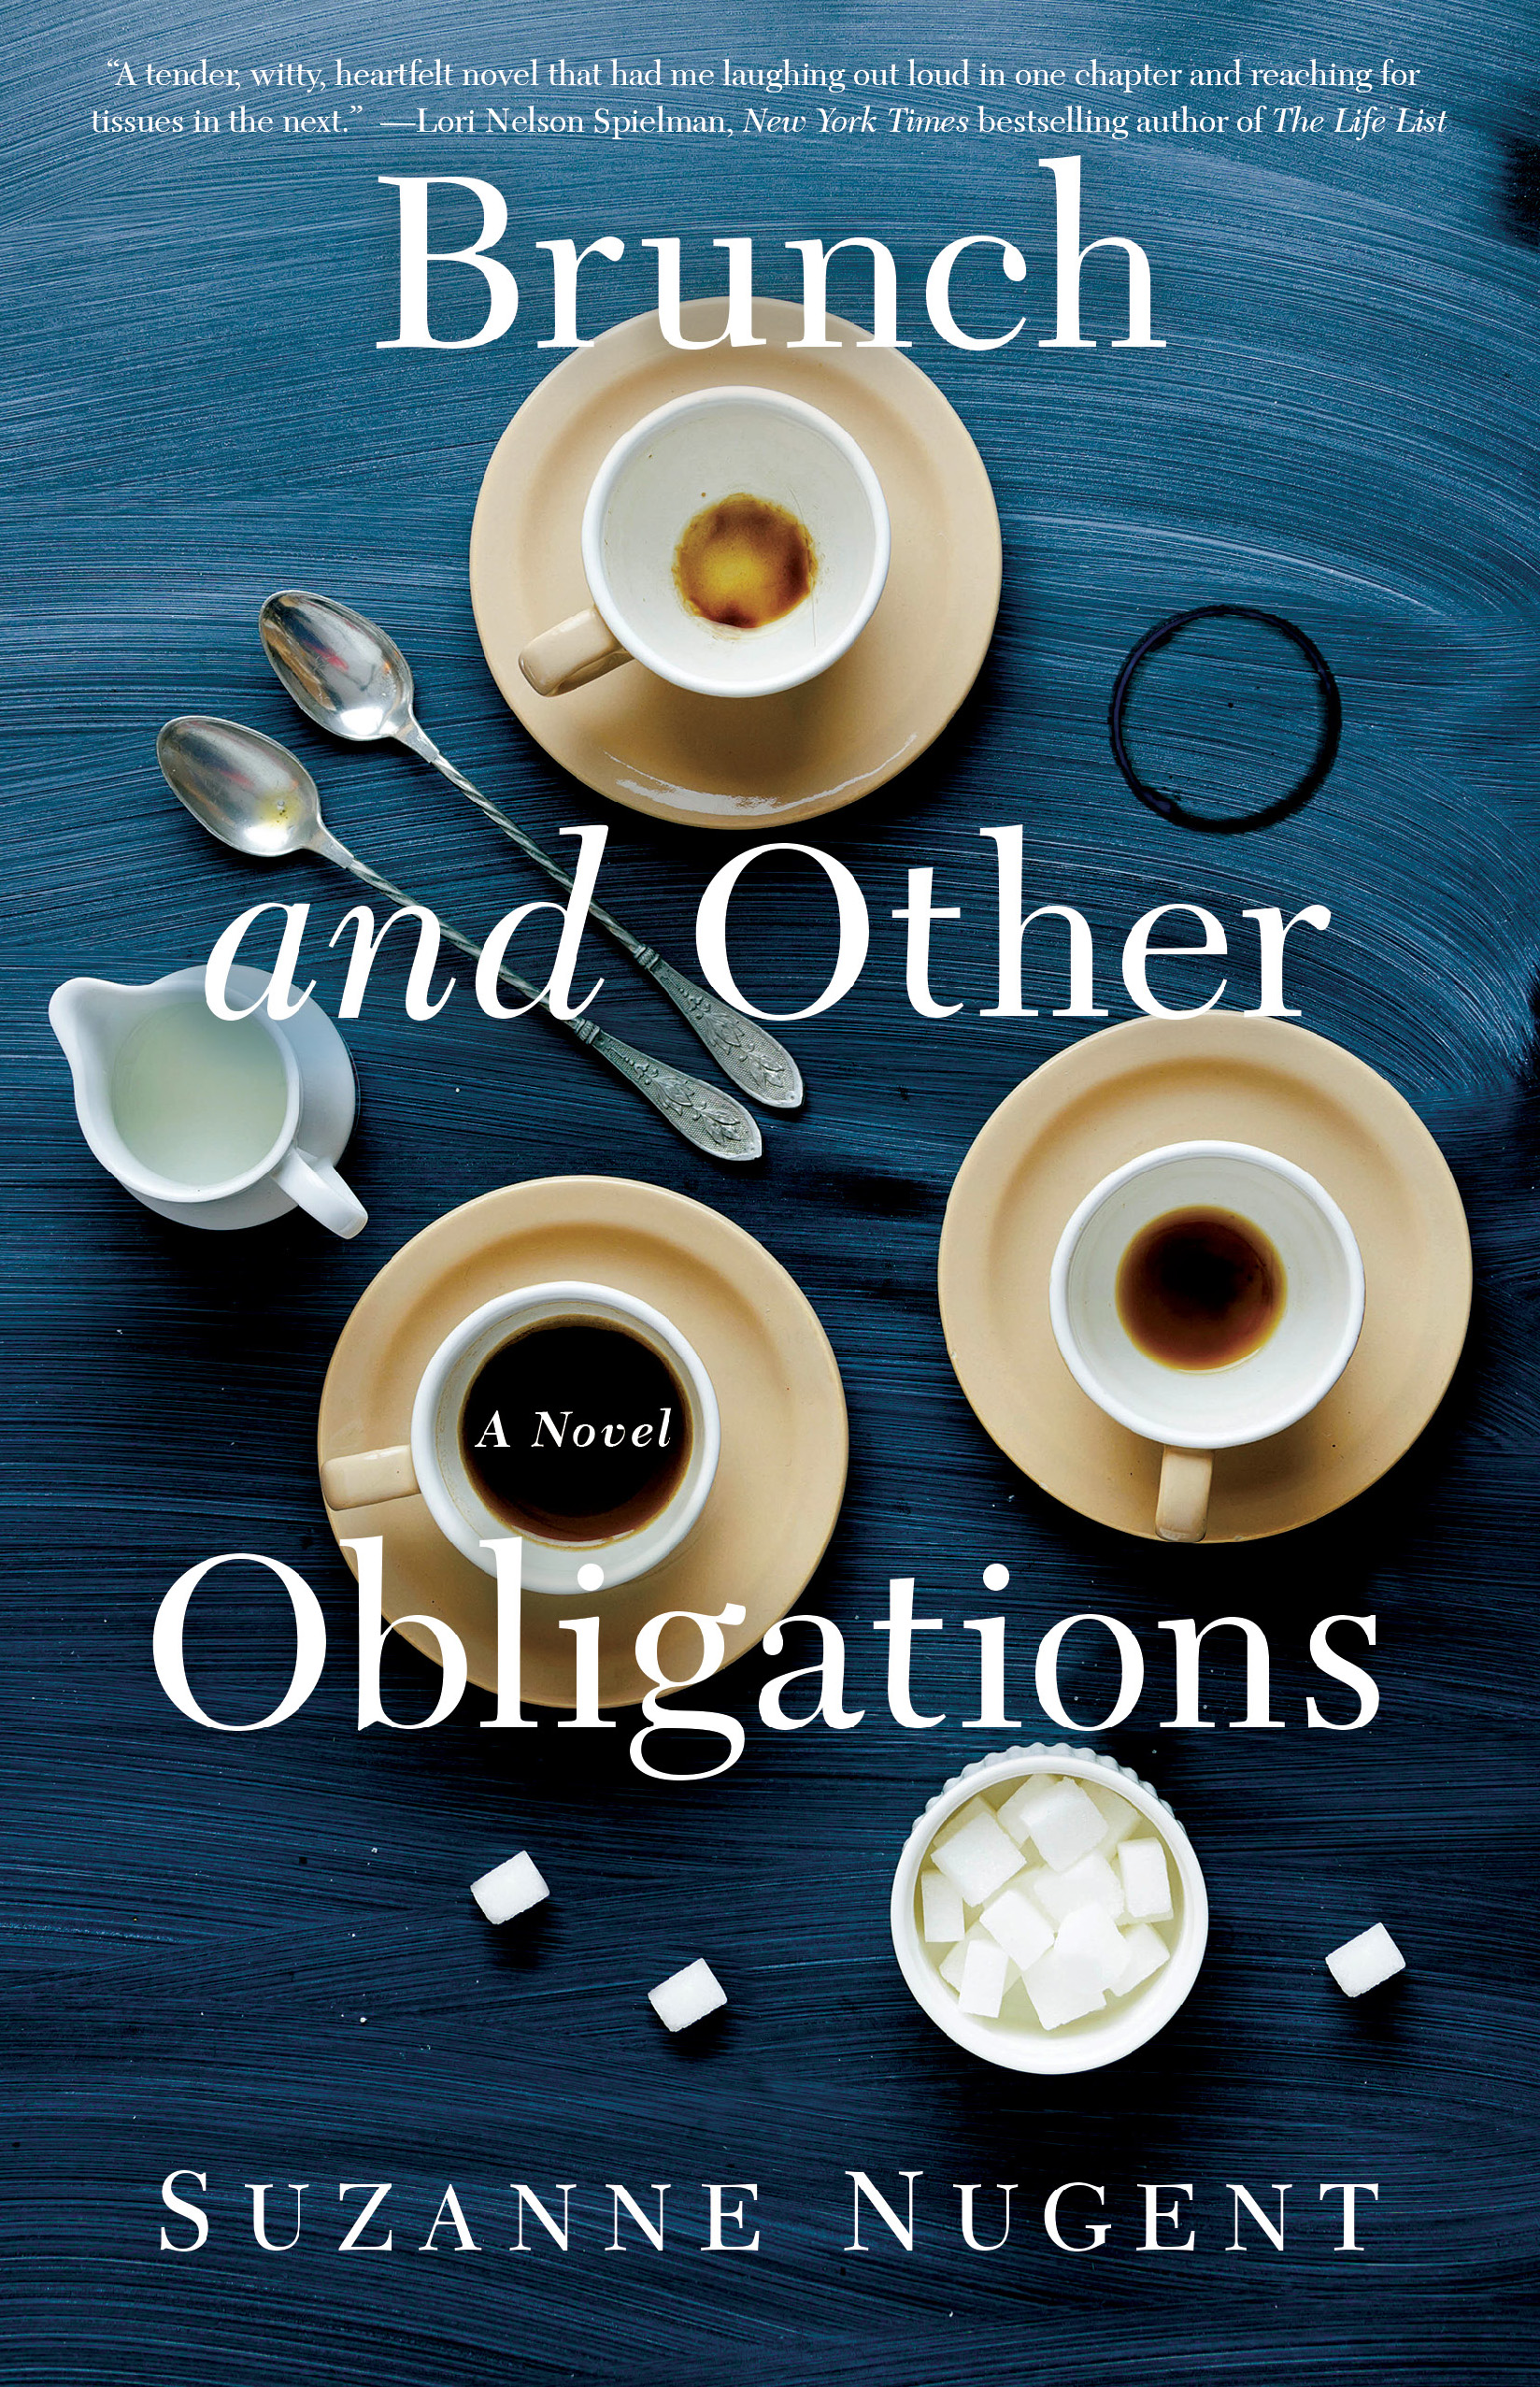 Brunch and Other Obligations by Suzanne Nugent